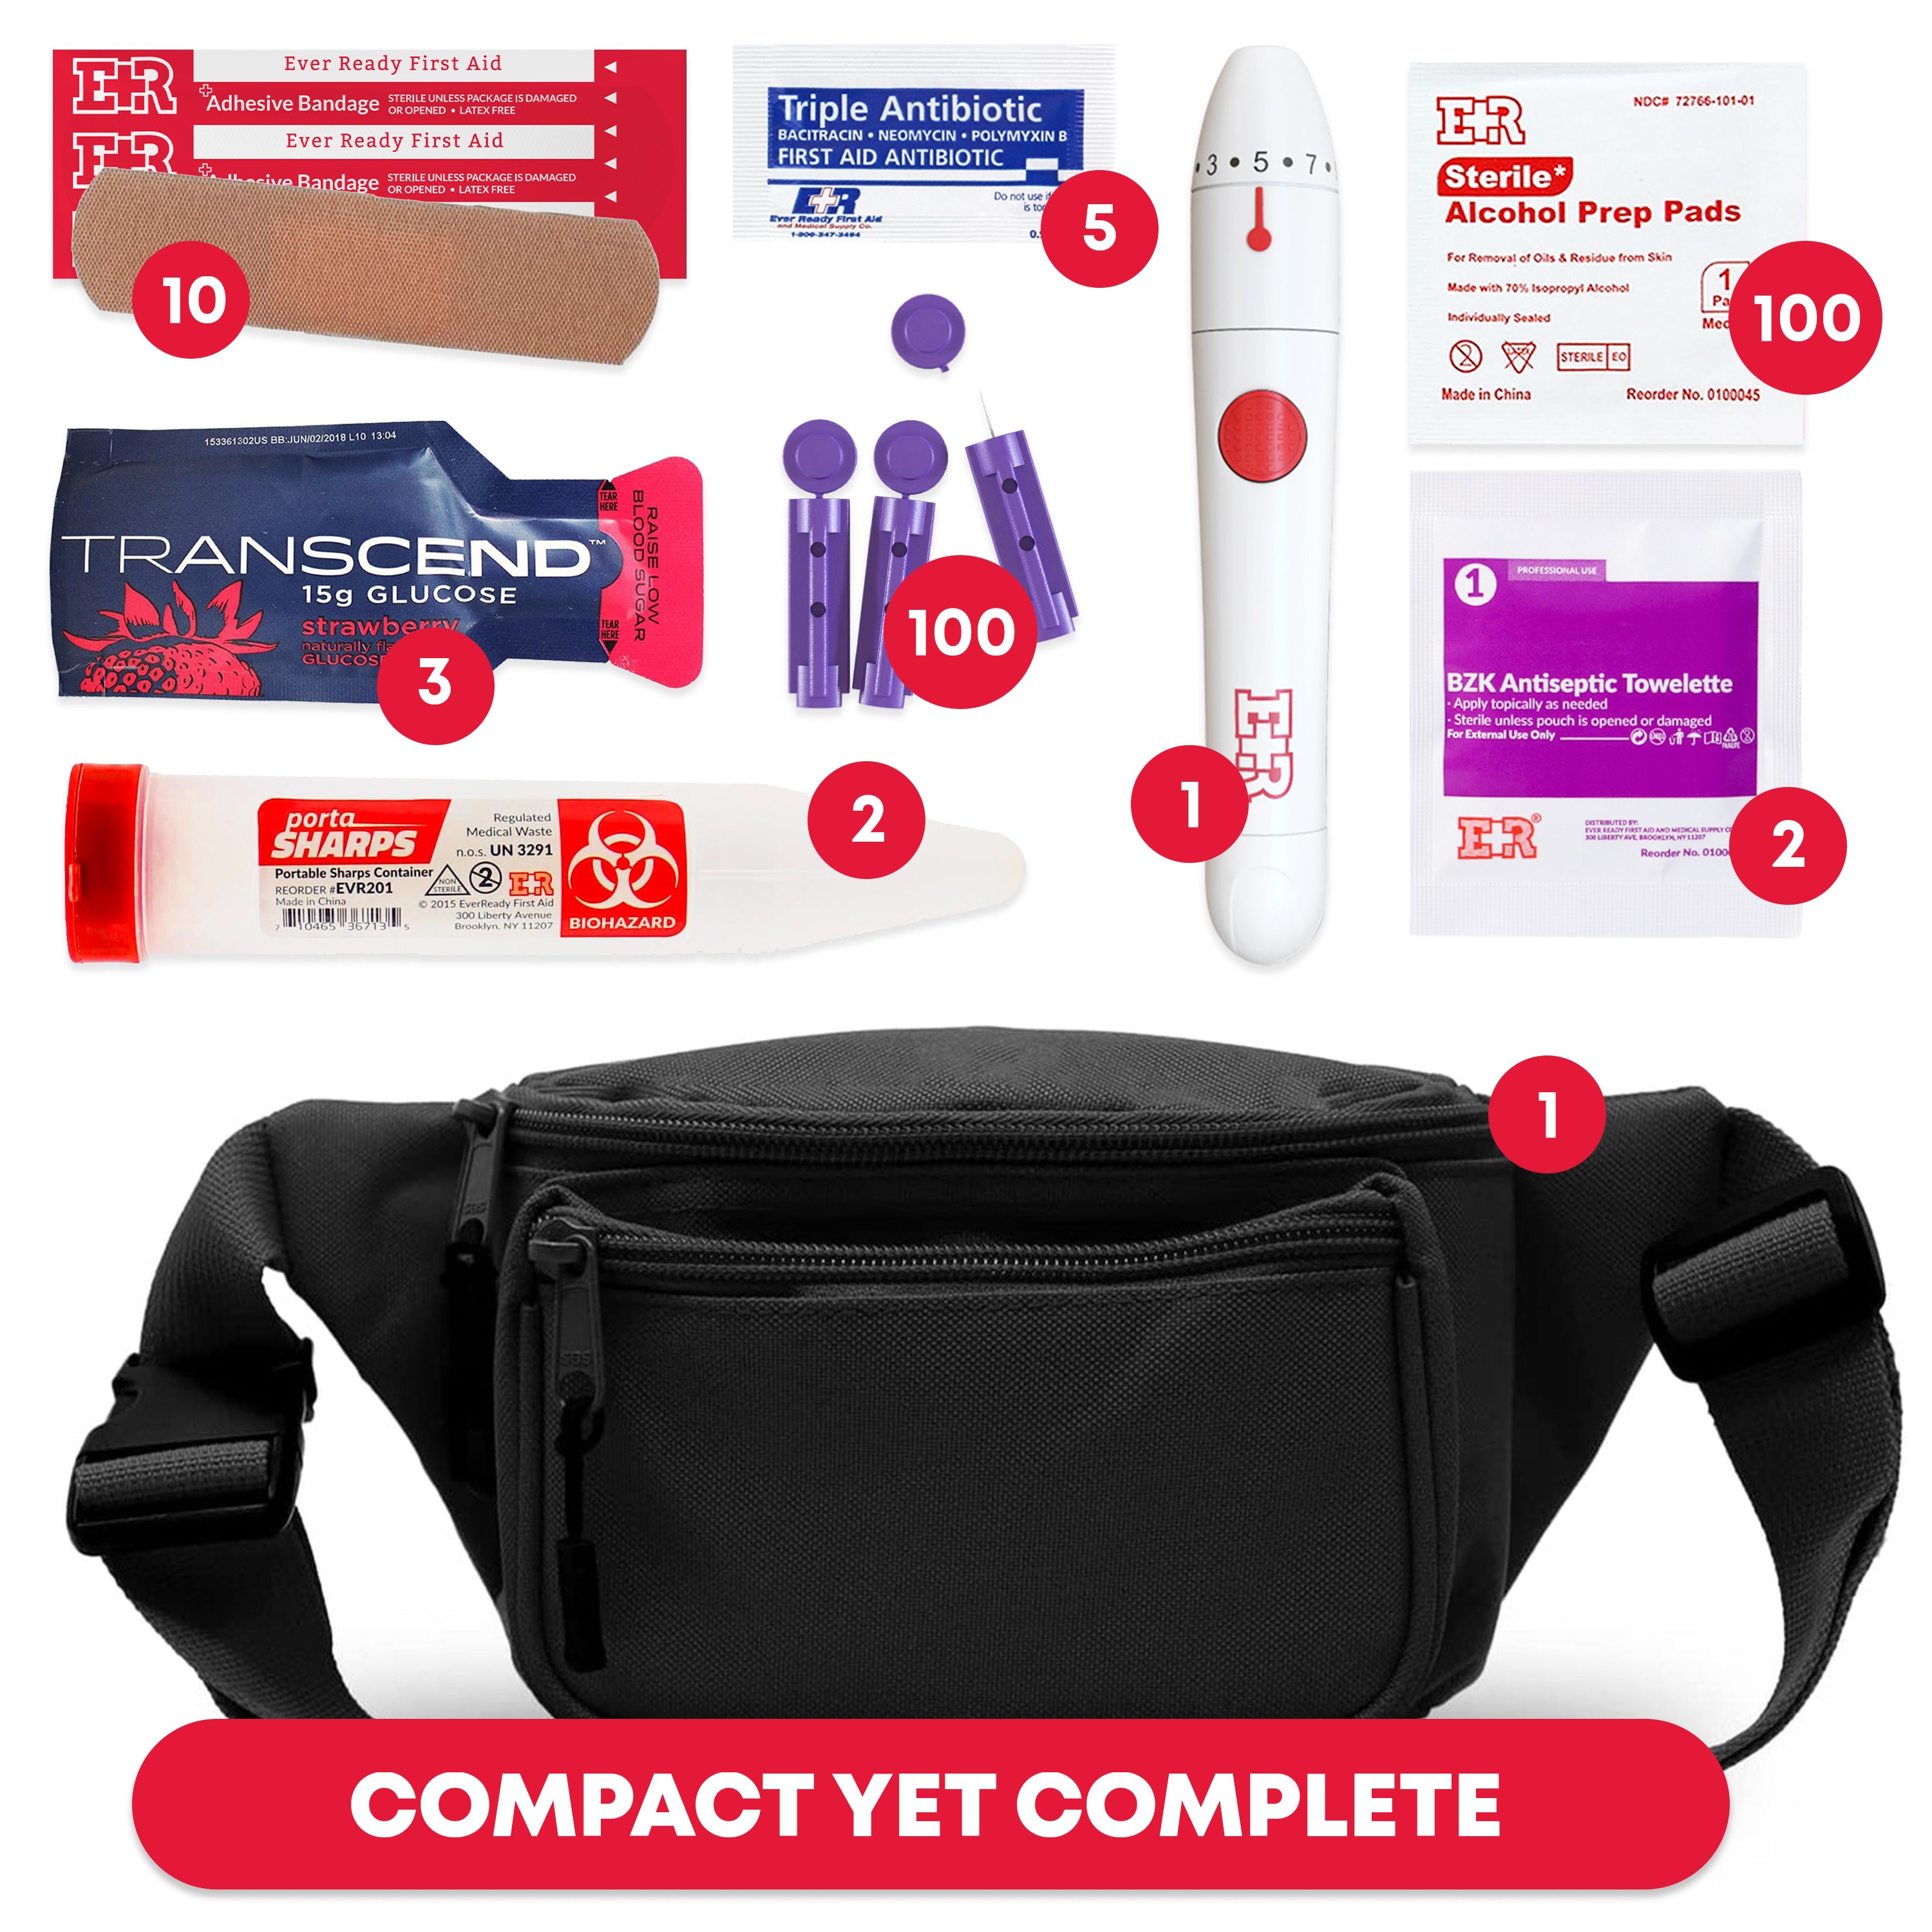 Ever Ready First Aid Diabetic Kit in Fanny Black